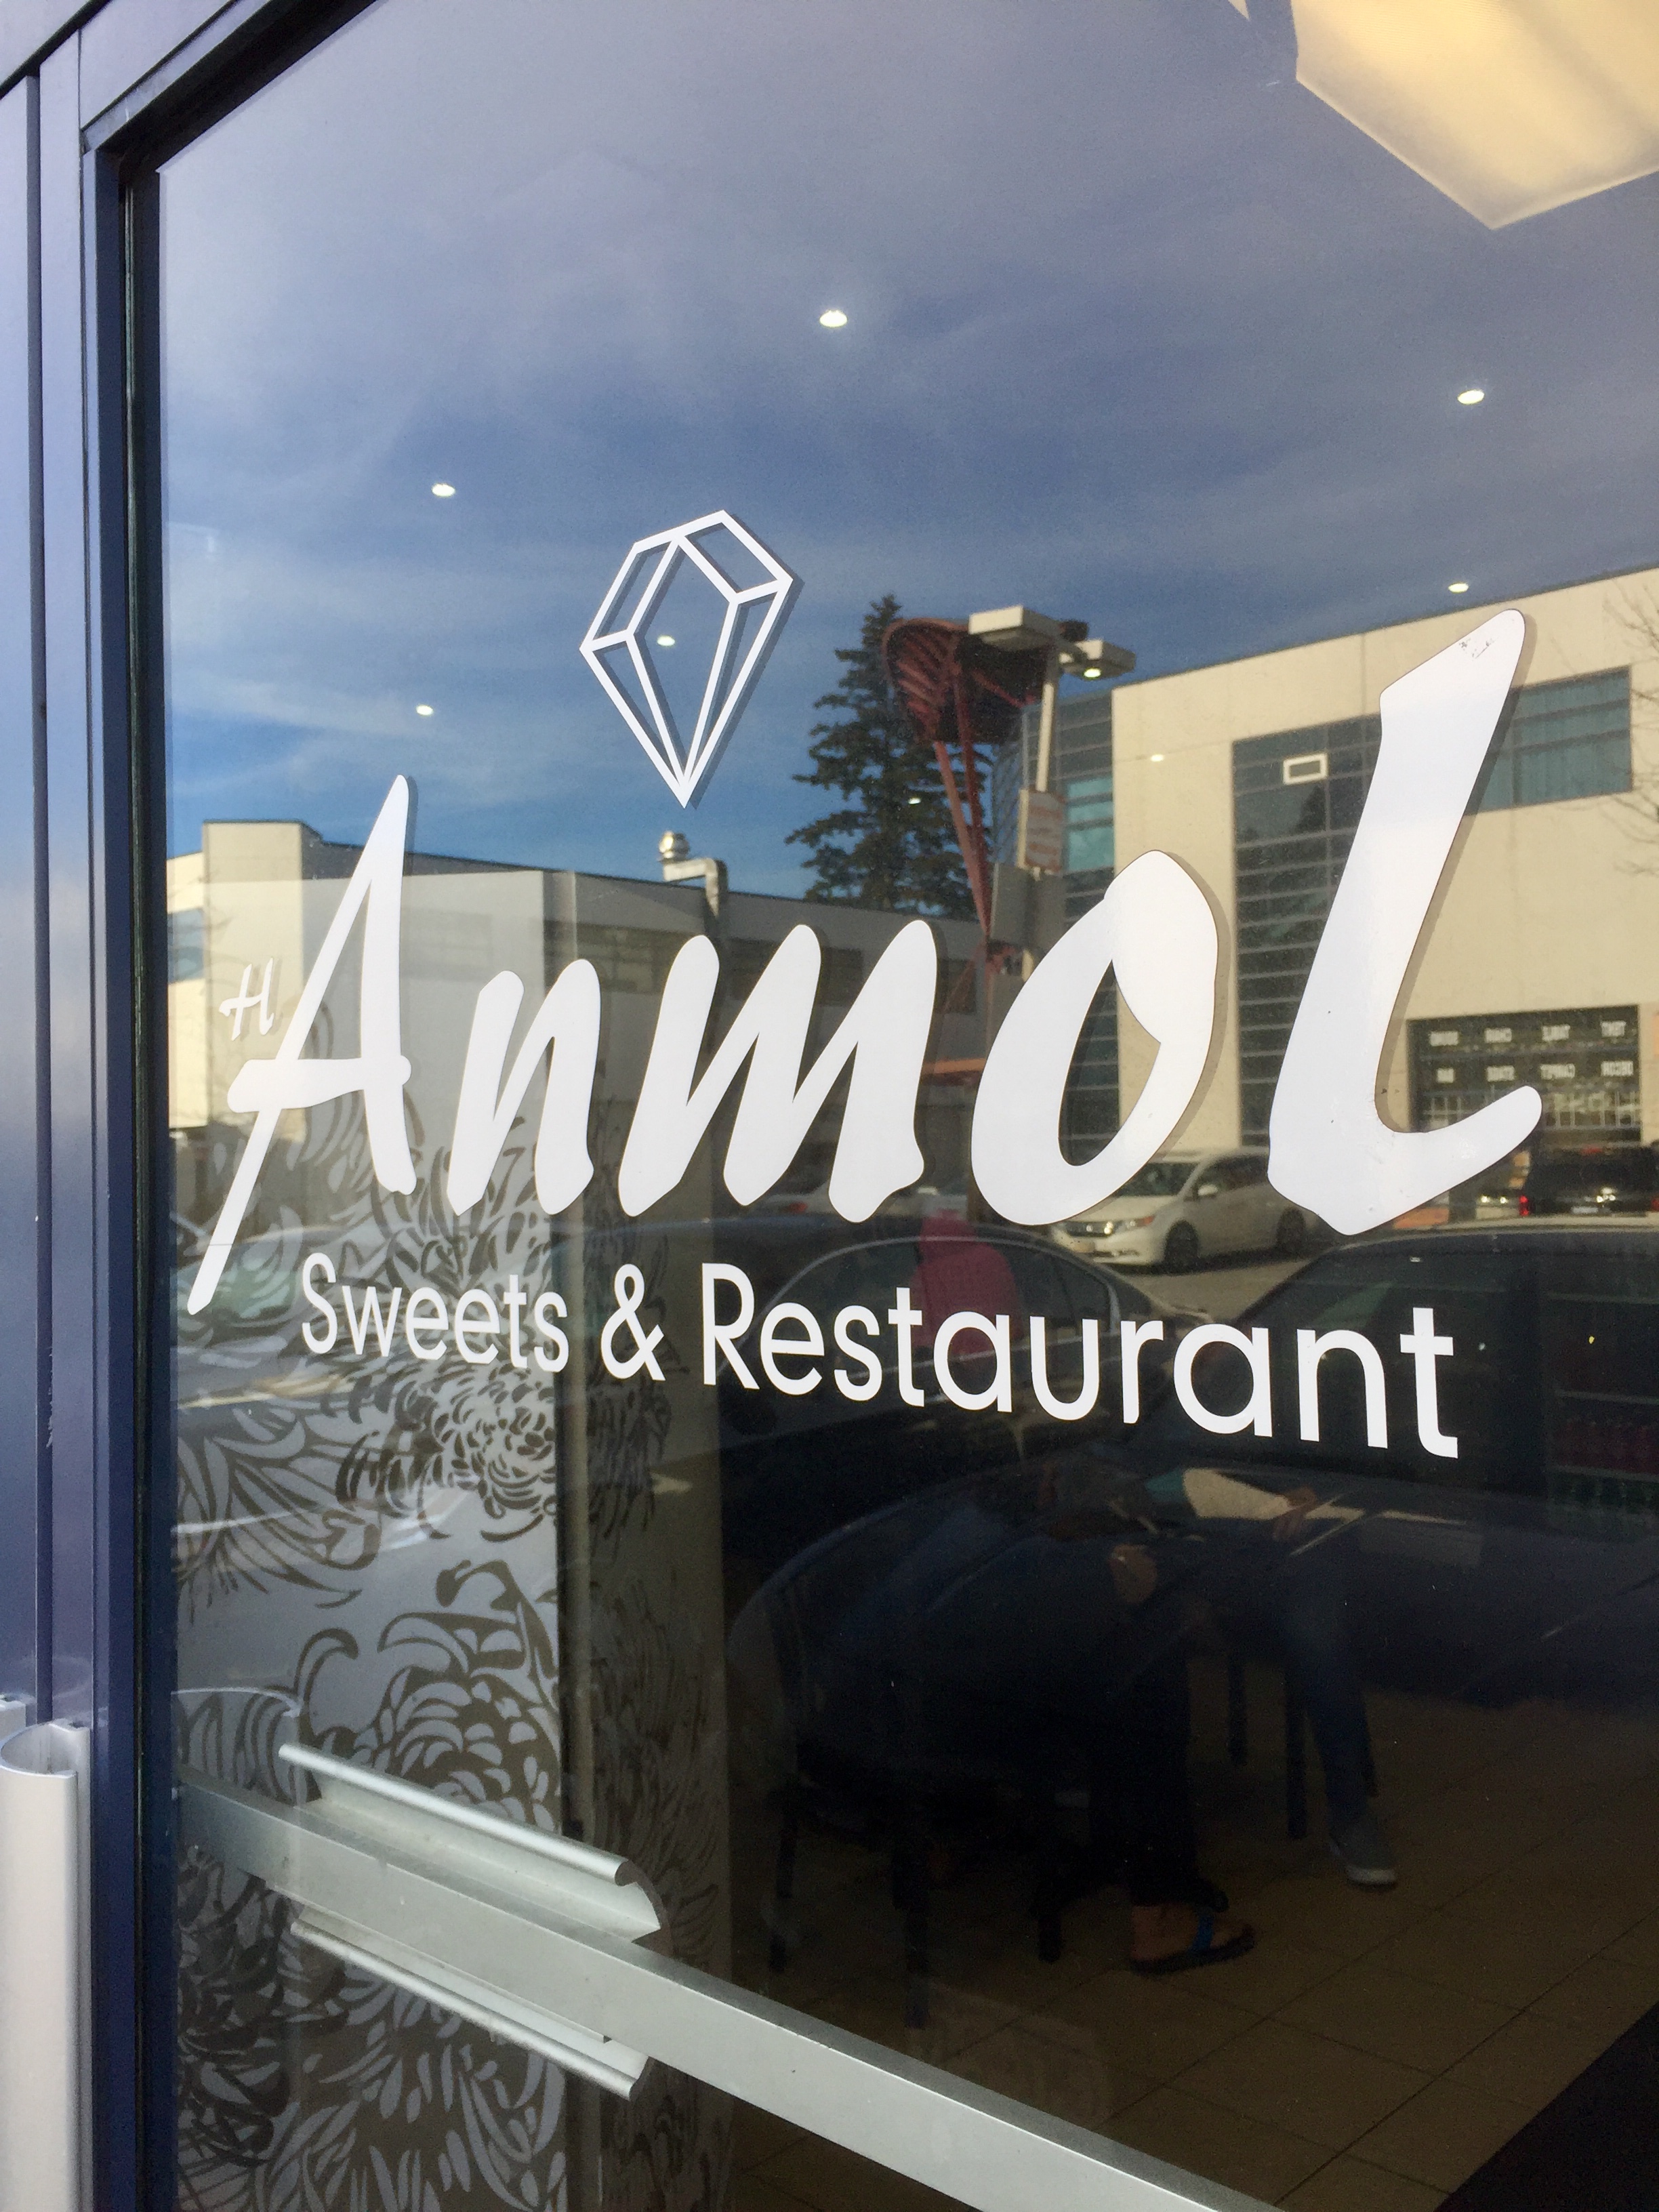 anmol-sweets-front-sign.jpg